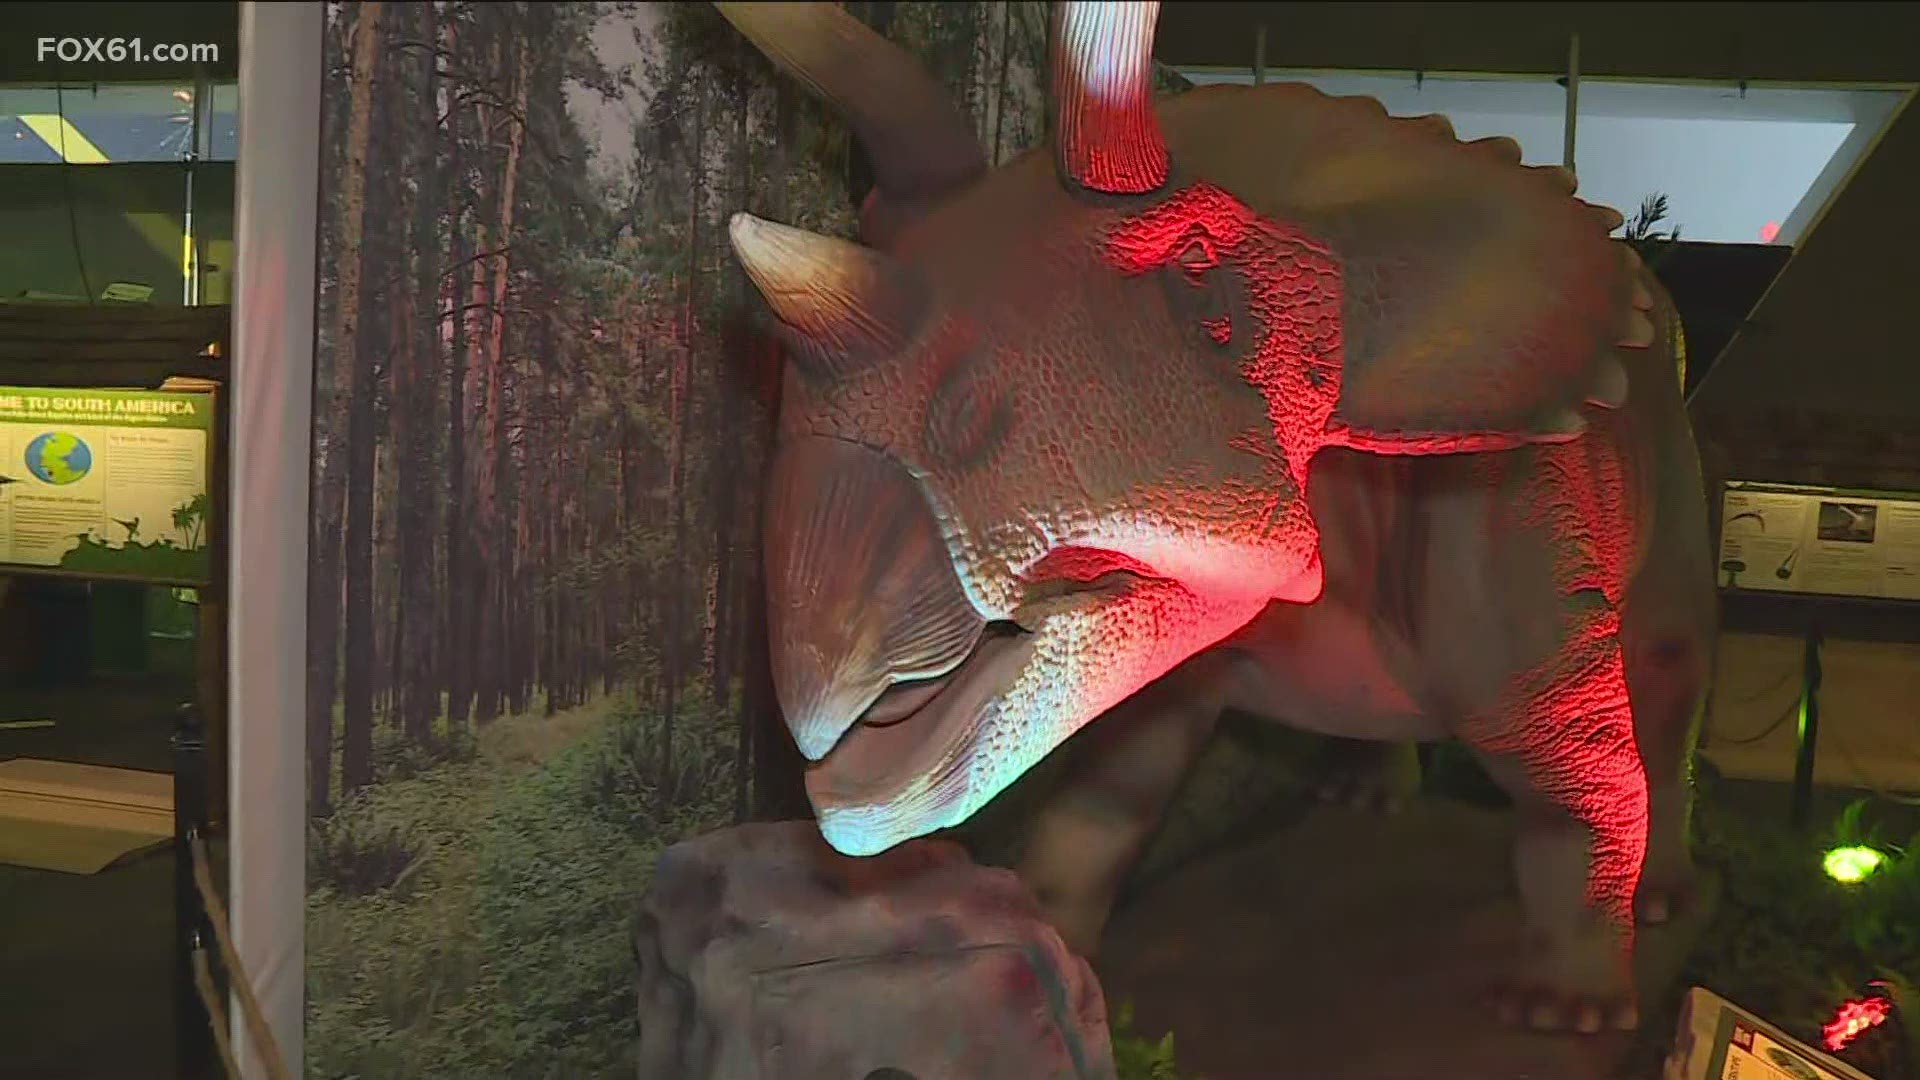 FOX61 visited the Connecticut Science Center on Thursday to explore the new Dinosaurs Around the World Exhibit.